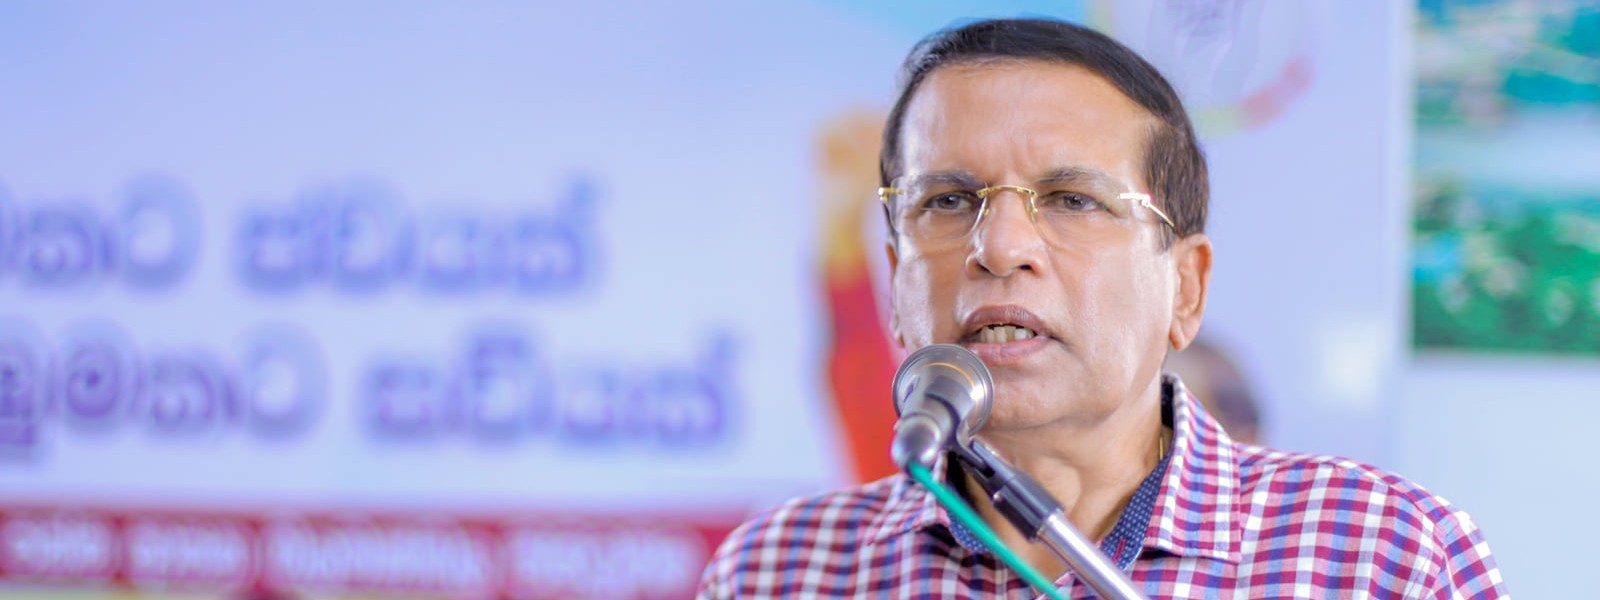 SLFP says no vote for candidate without plan